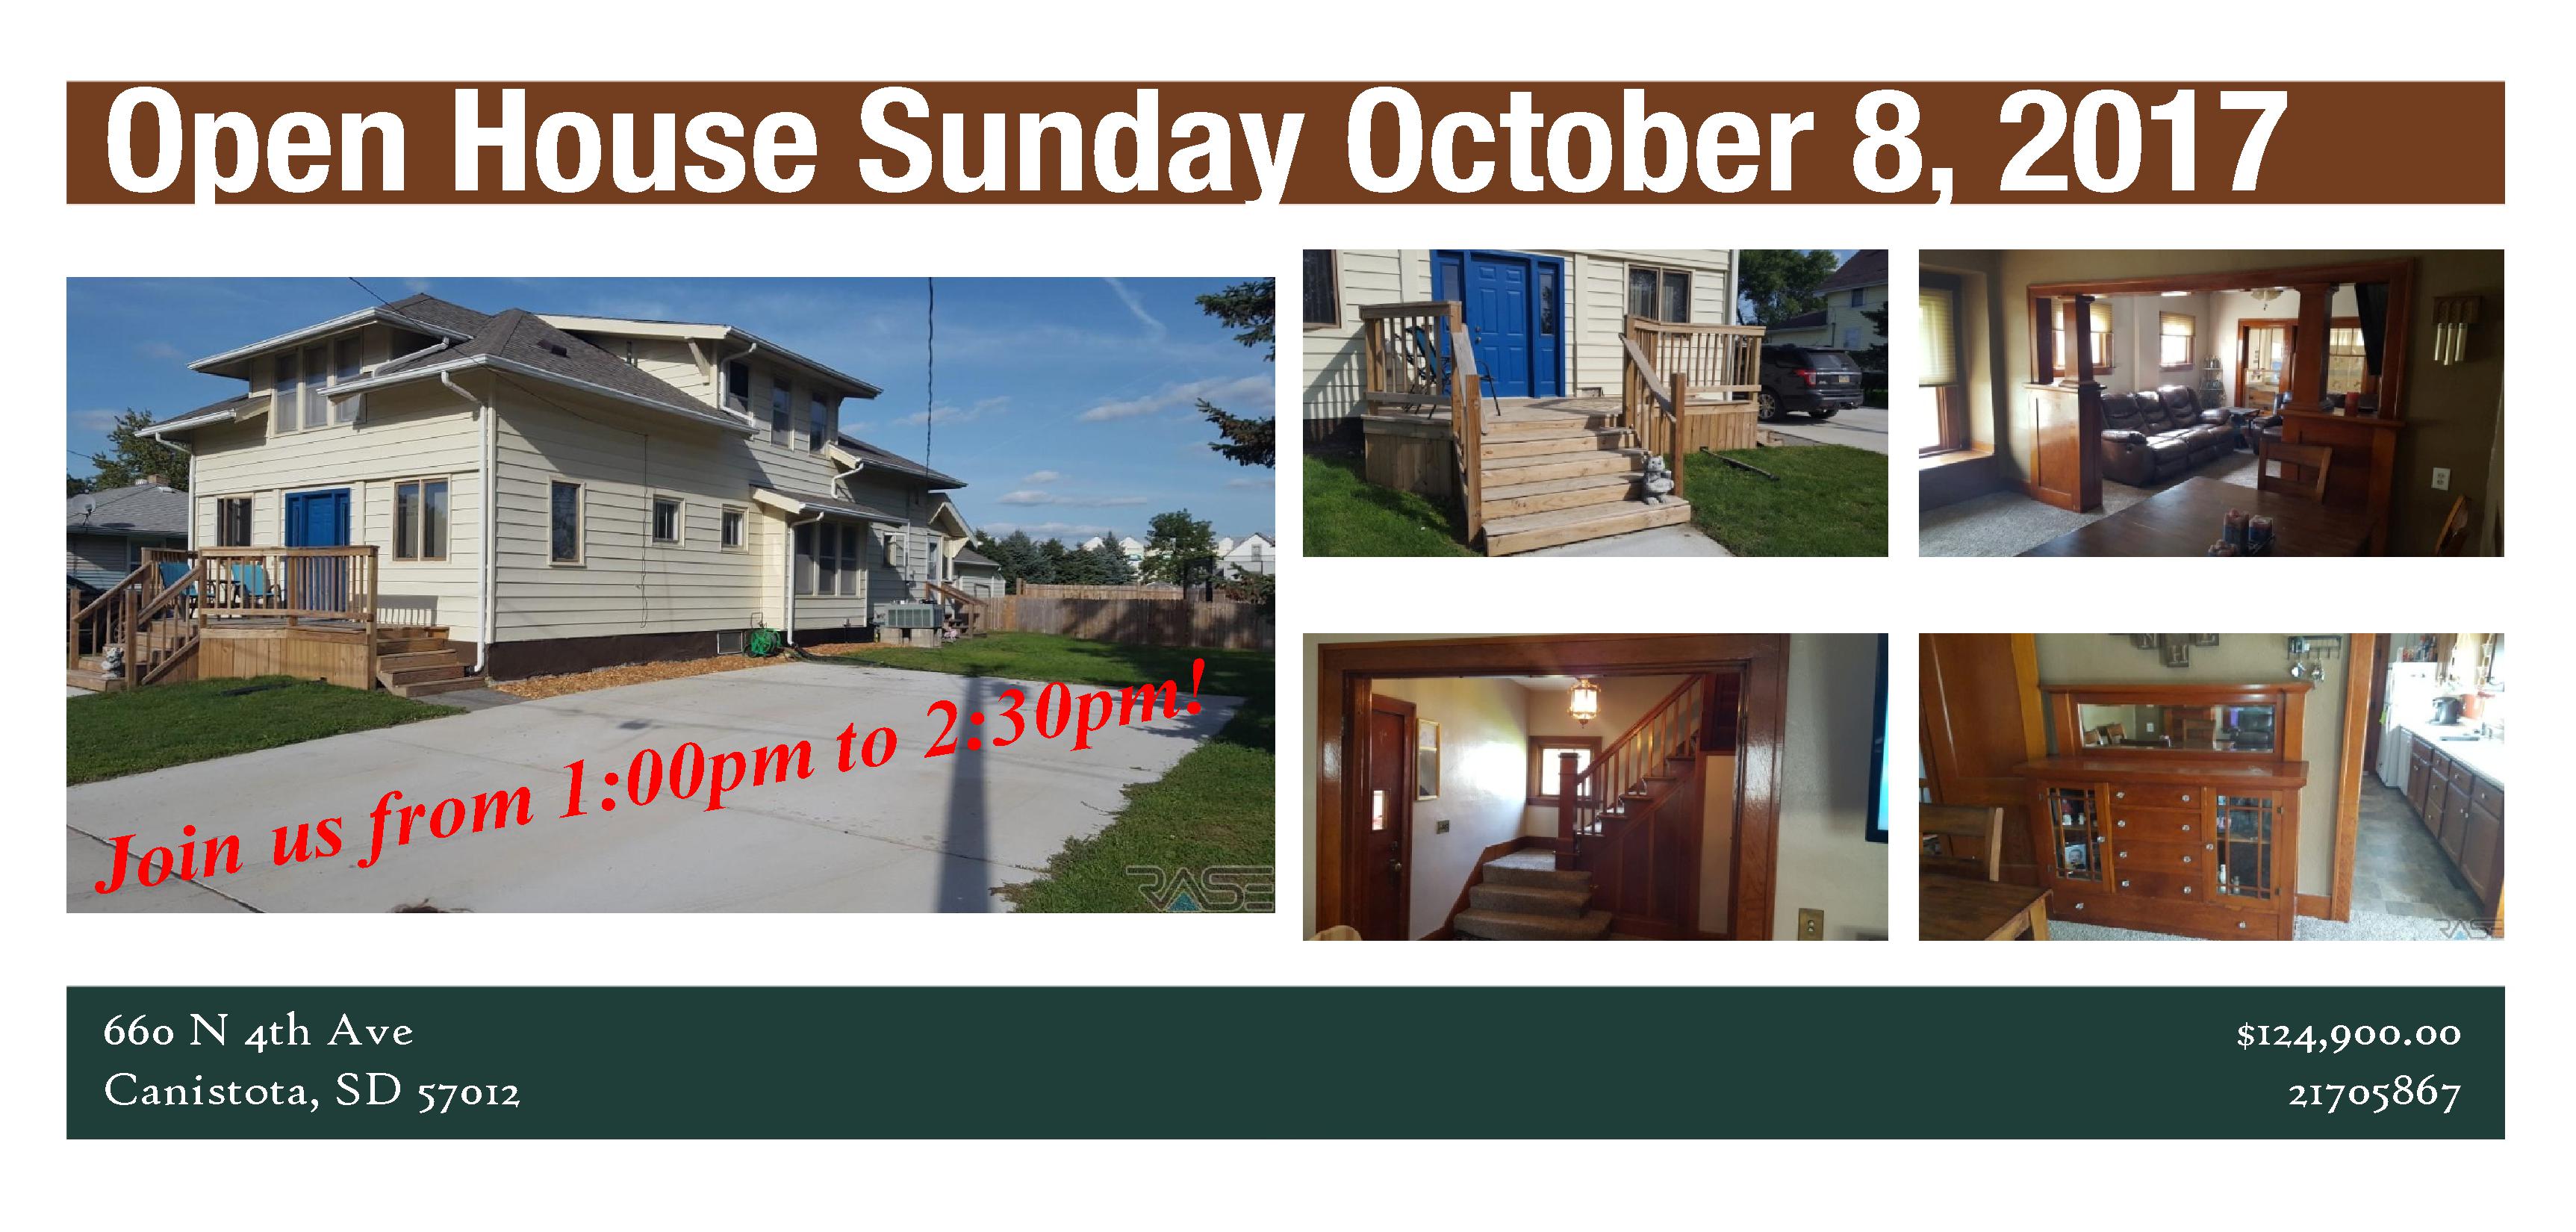 Open House October 8, 2017 from 1:00pm to 2:30pm